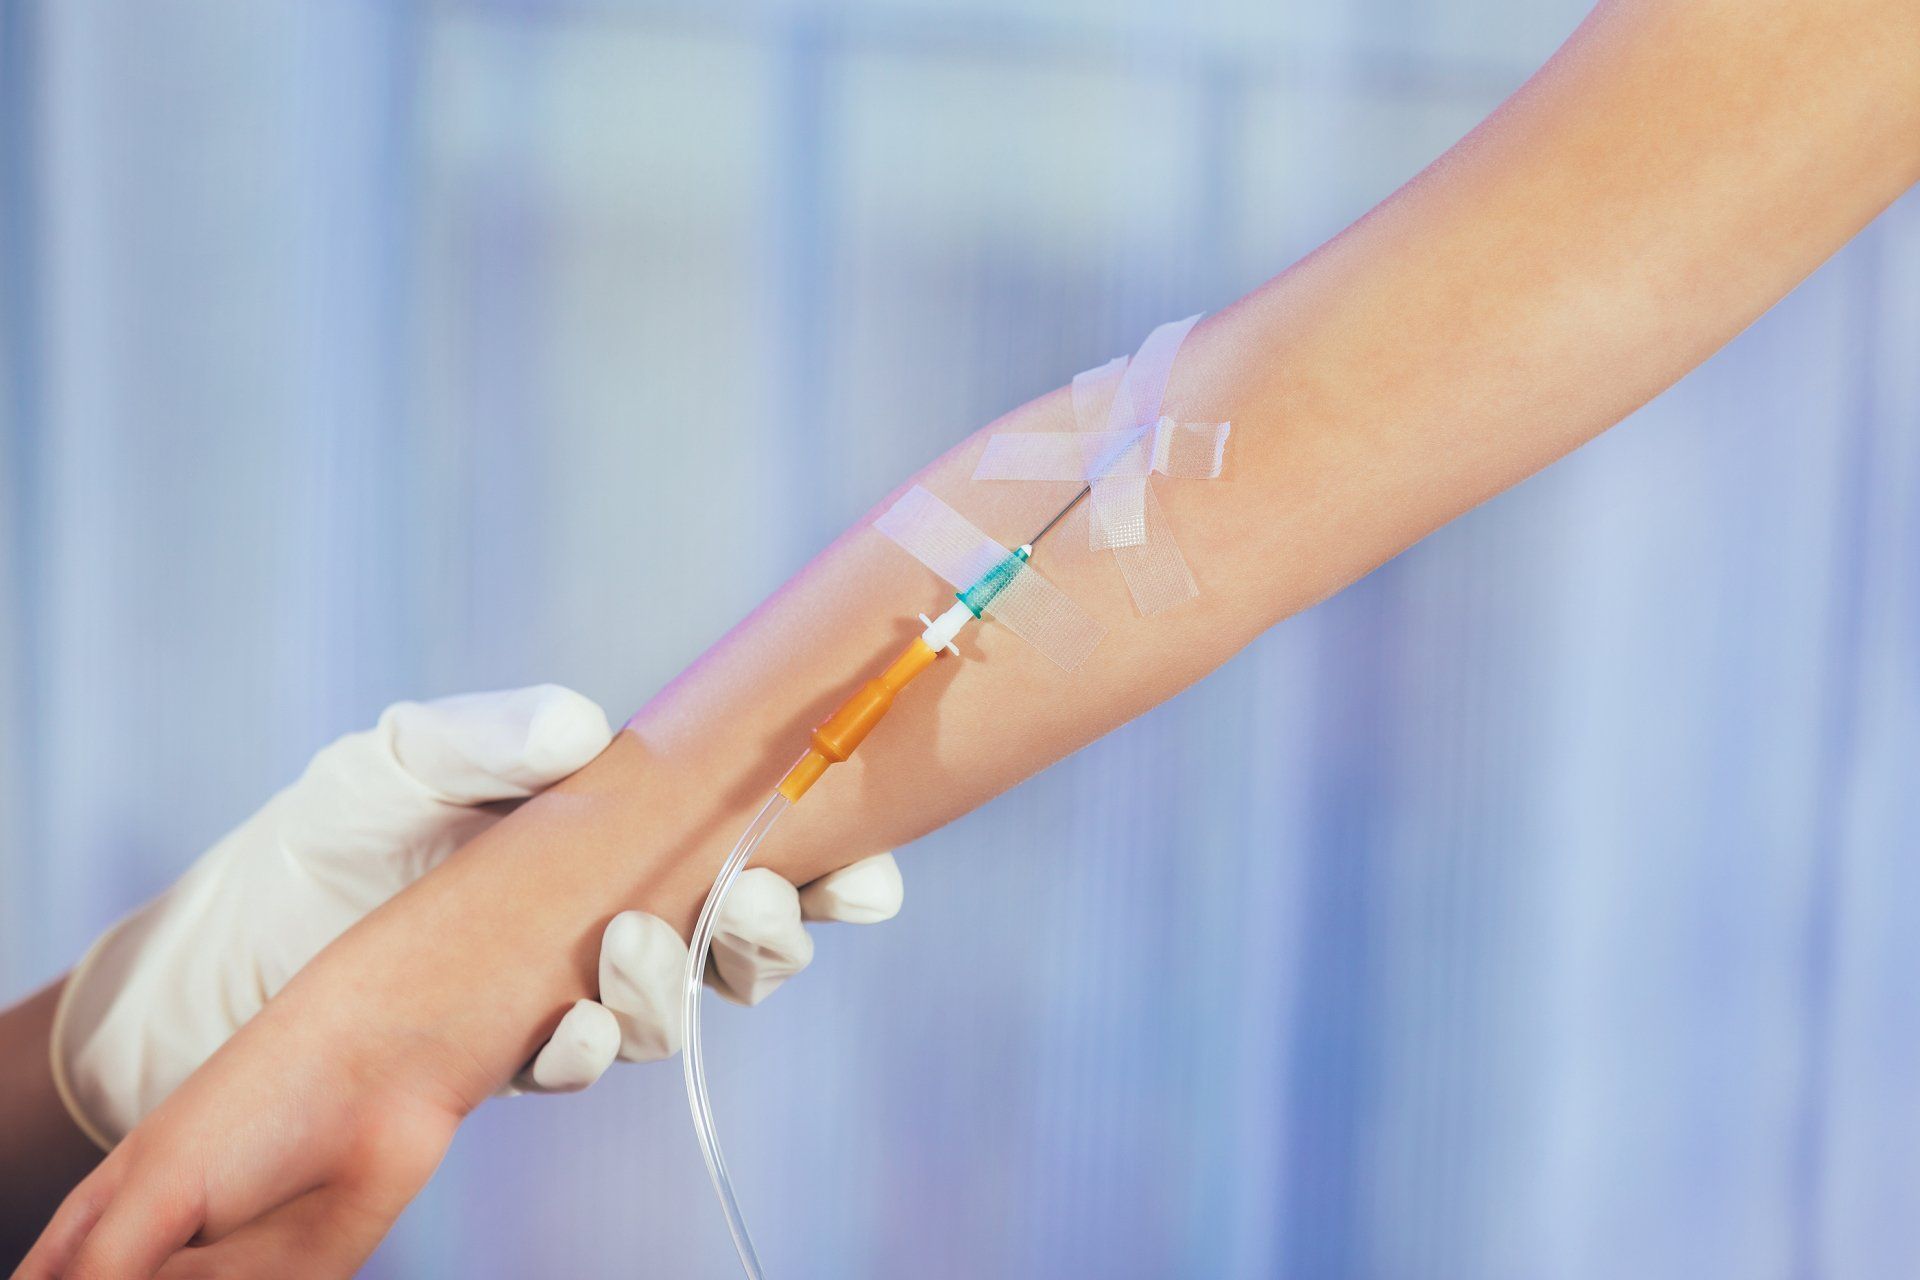 IV needle going into a person's arm with a gloved hand holding the arm